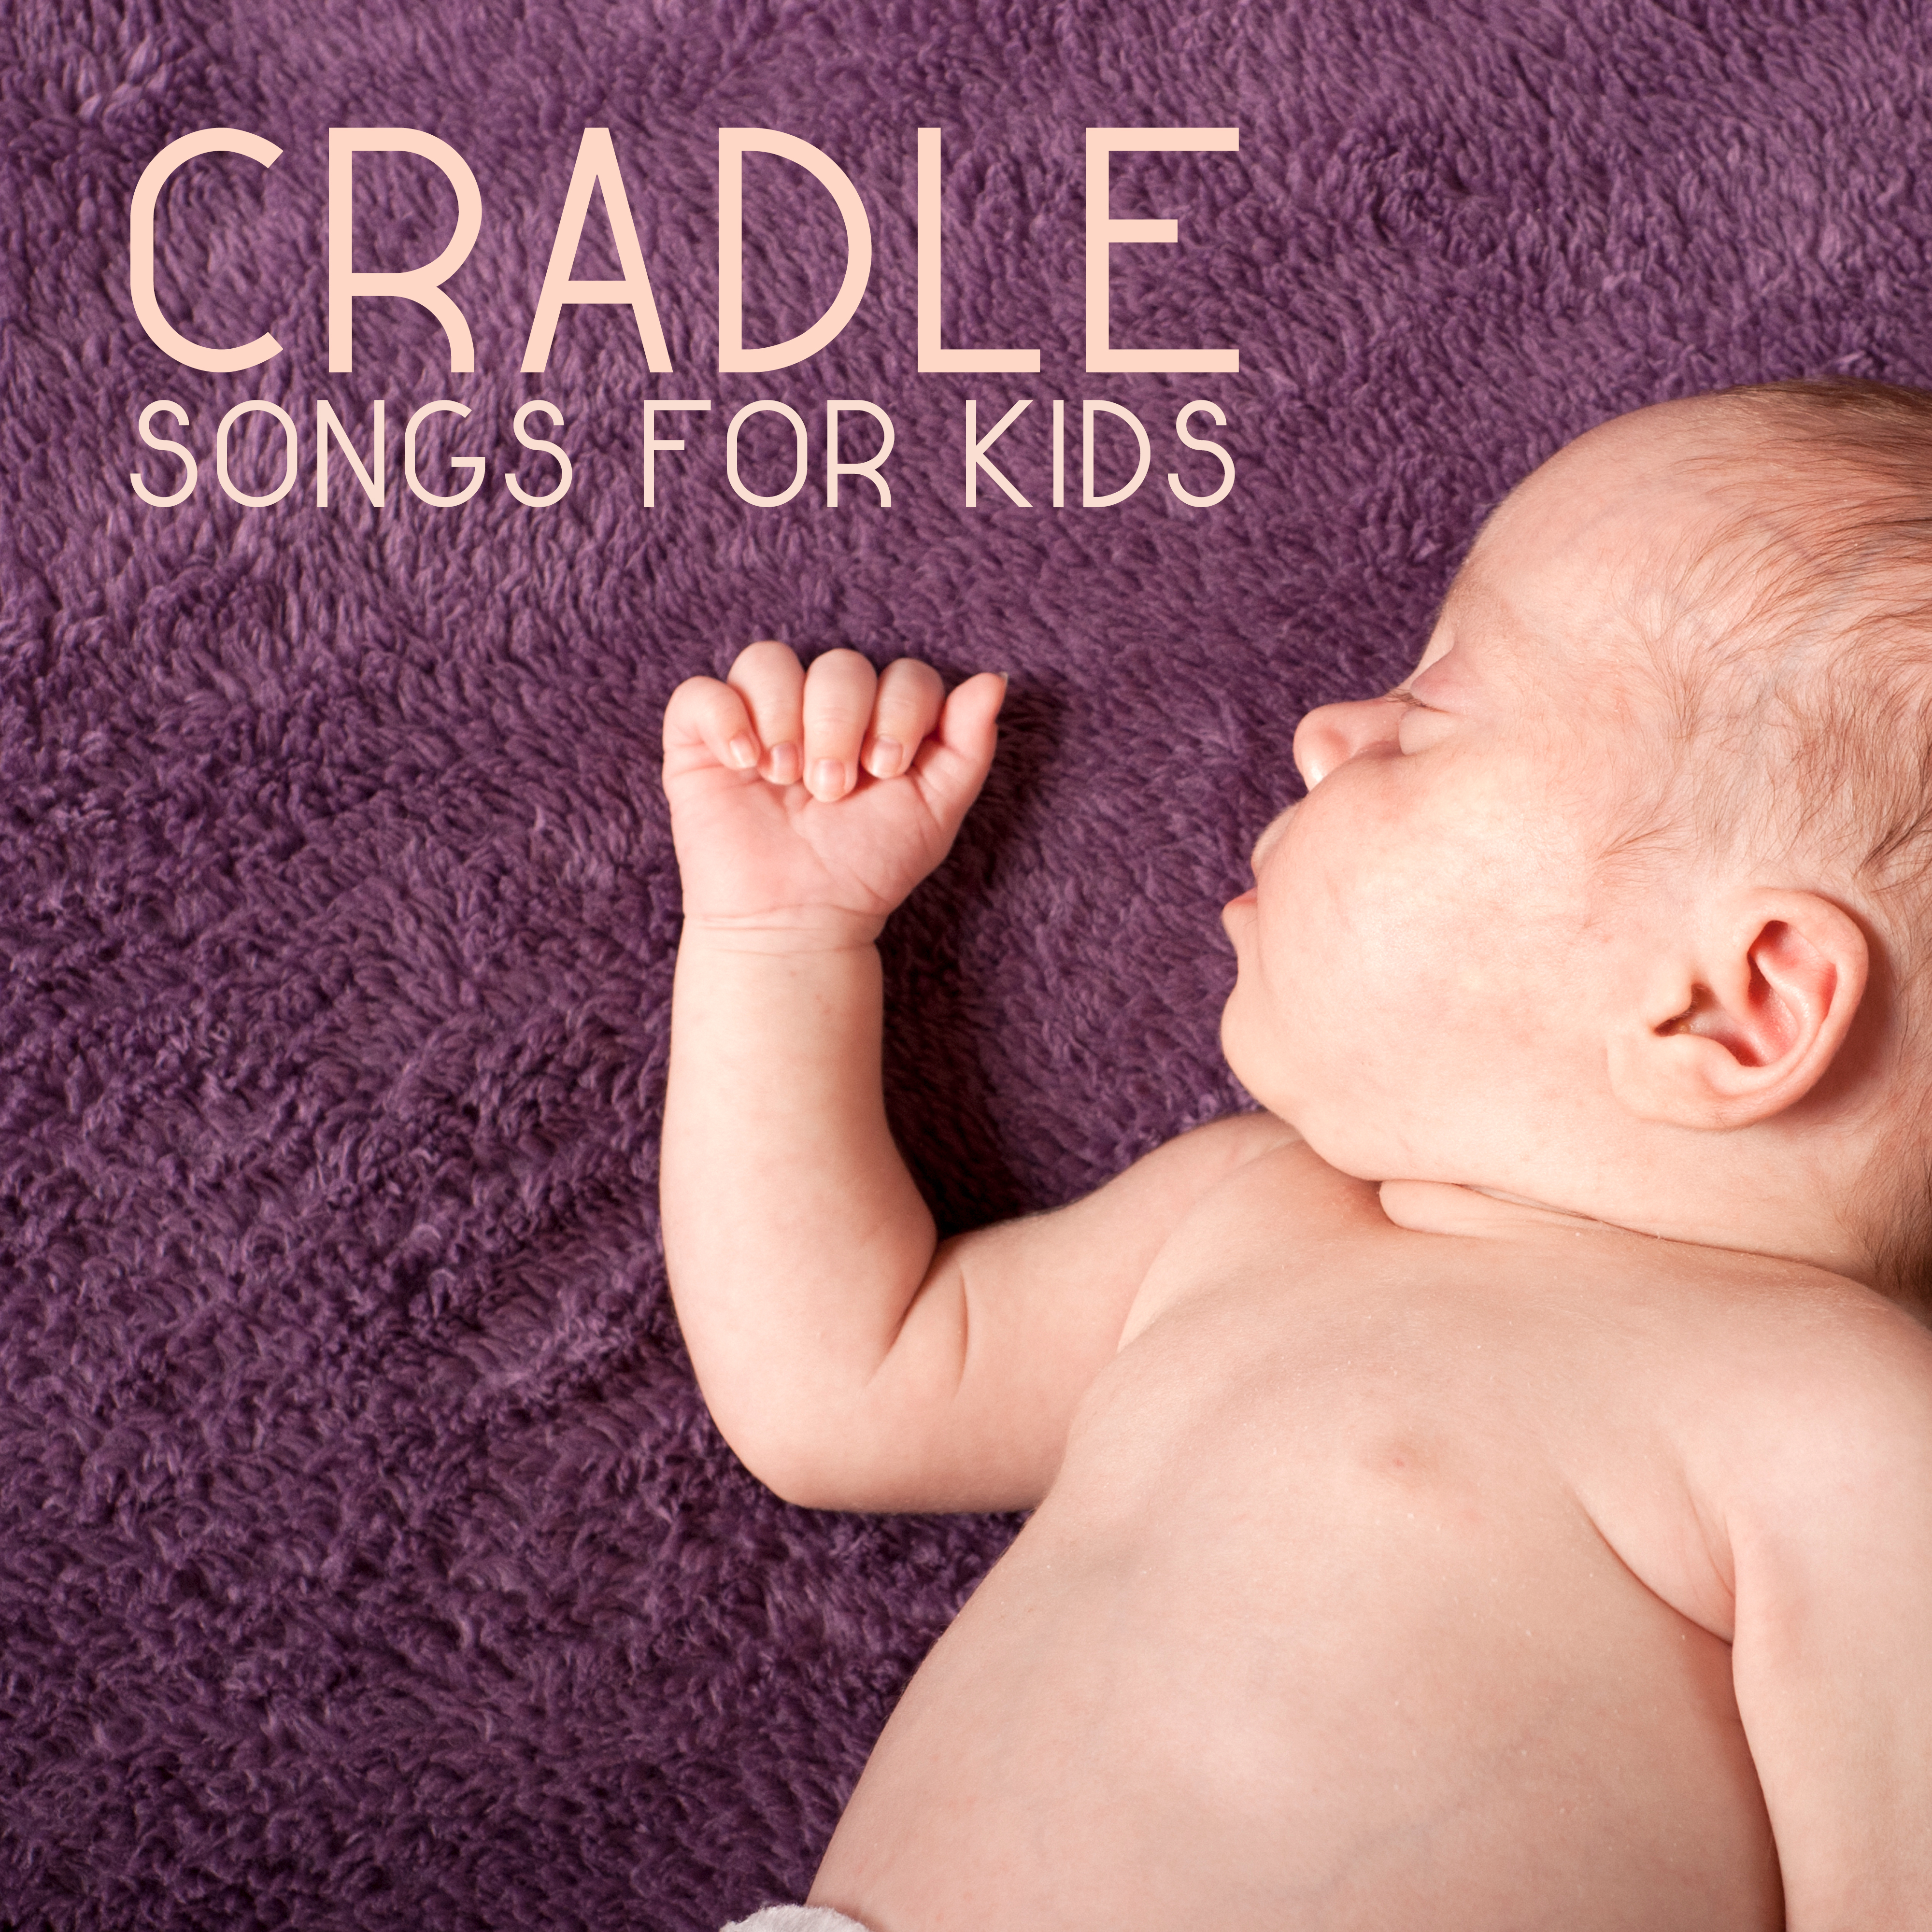 Cradle Songs for Kids  Deep Dreams, Peaceful Music for Baby, Restful Sleep, Baby Music, Naptime, Relaxation Bedtime